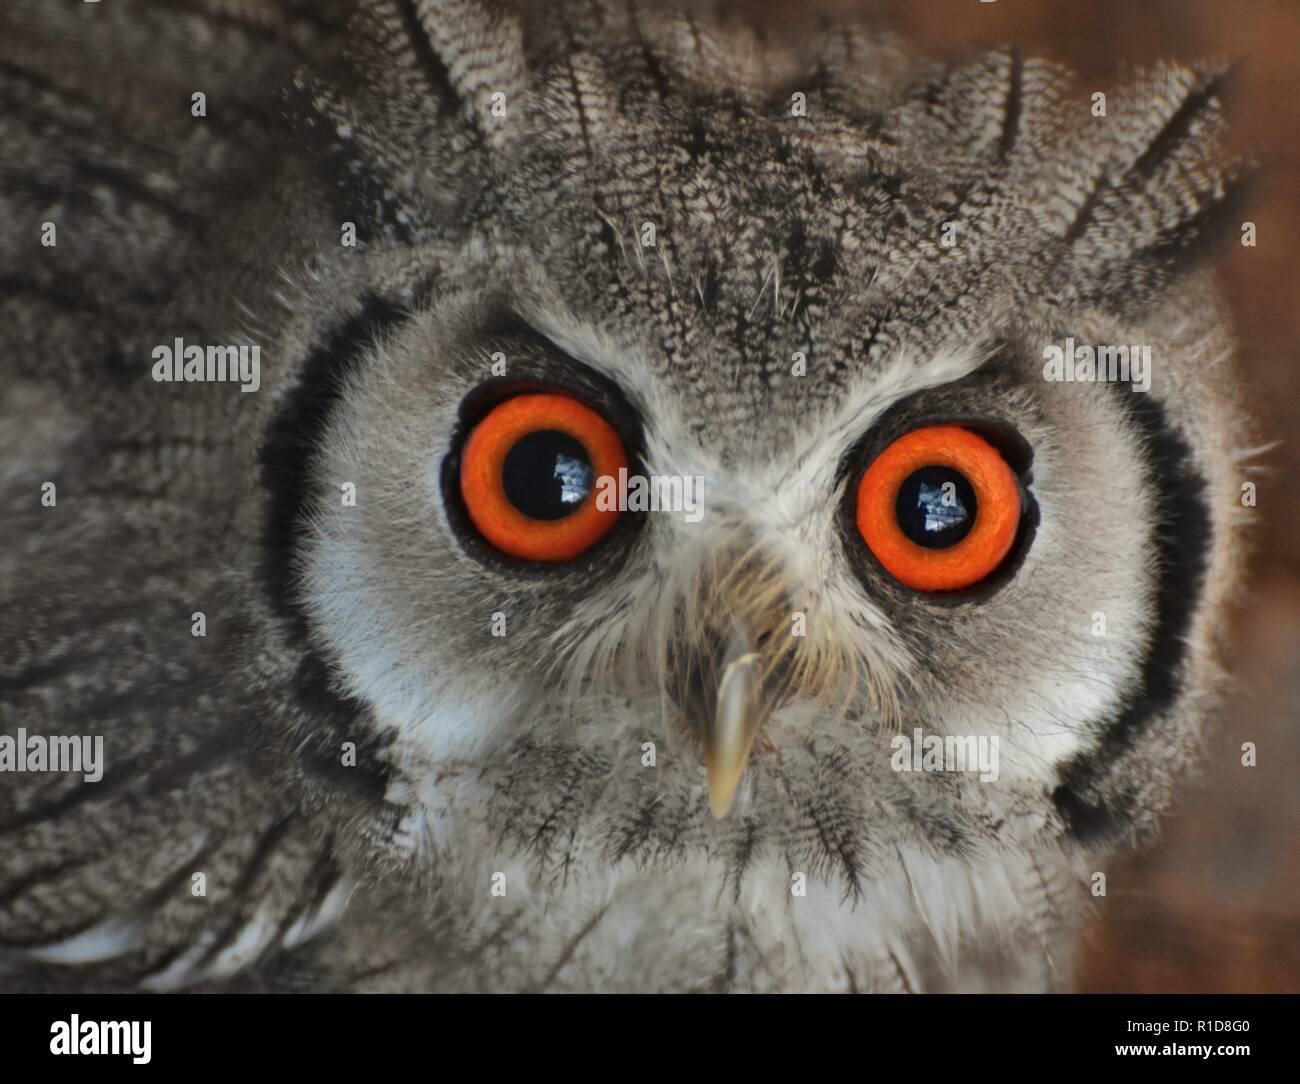 Northern White-faced Owl (Ptilopsis leucotis), a species of owl found in northern Africa. Stock Photo